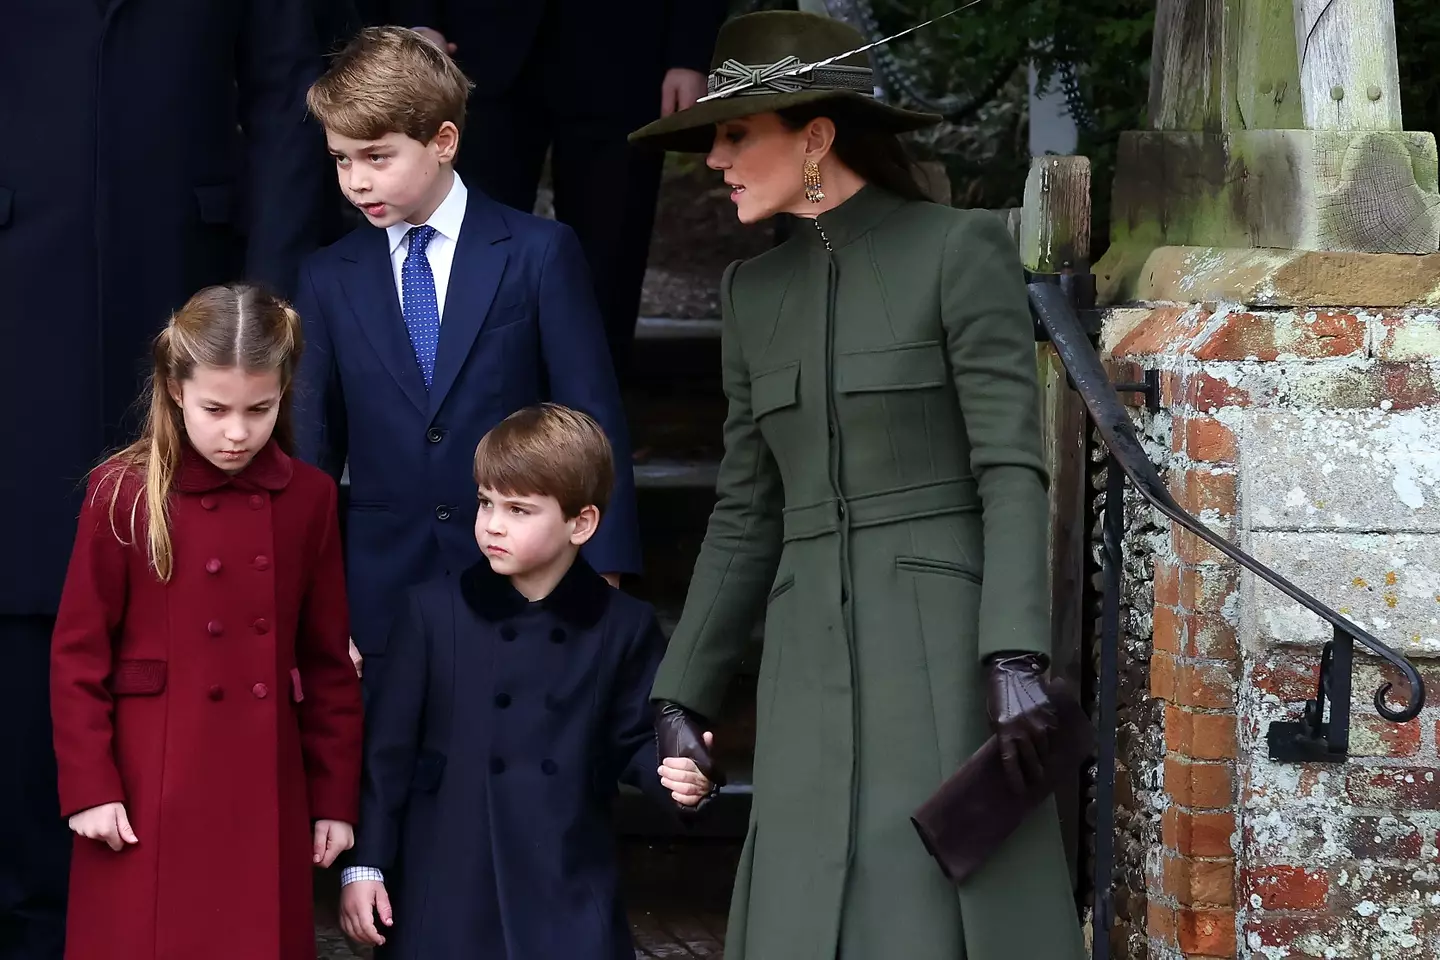 The Princess of Wales with her three children, Prince George, Princess Charlotte and Prince Louis (Stephen Pond/Getty Images)